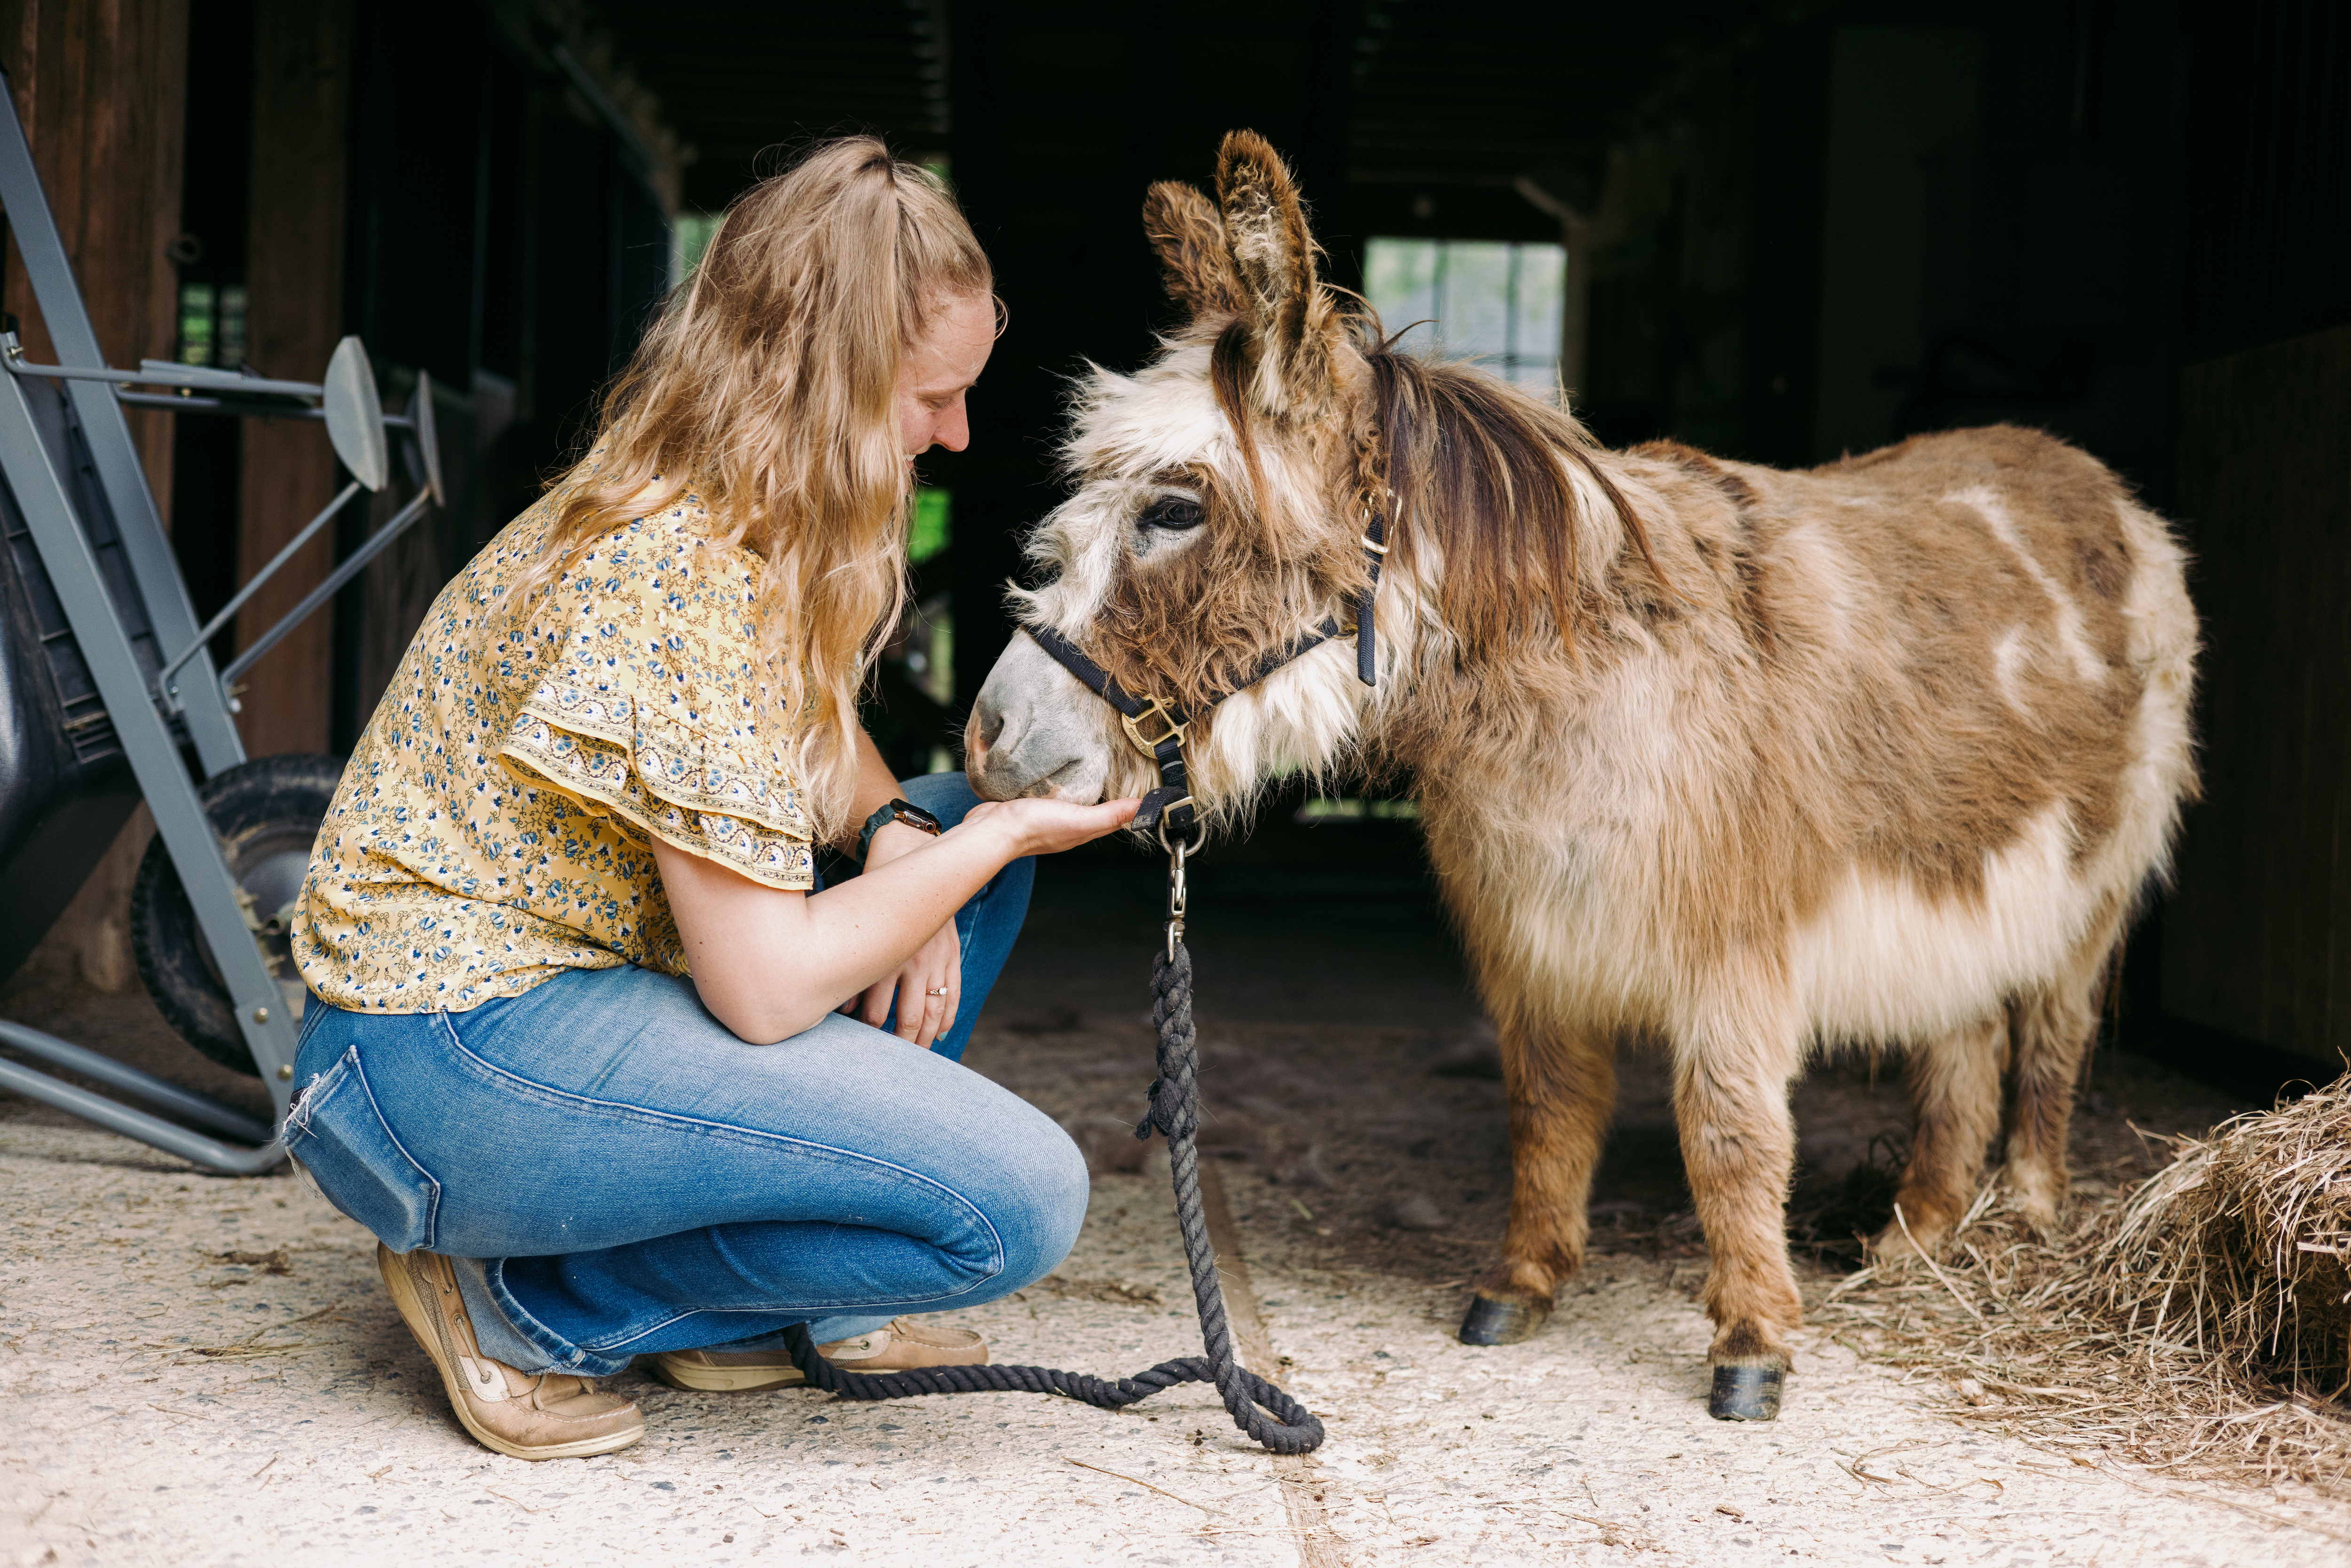 Natalie Duncan crouches next to adorable brown and white mini donkey Fireball.